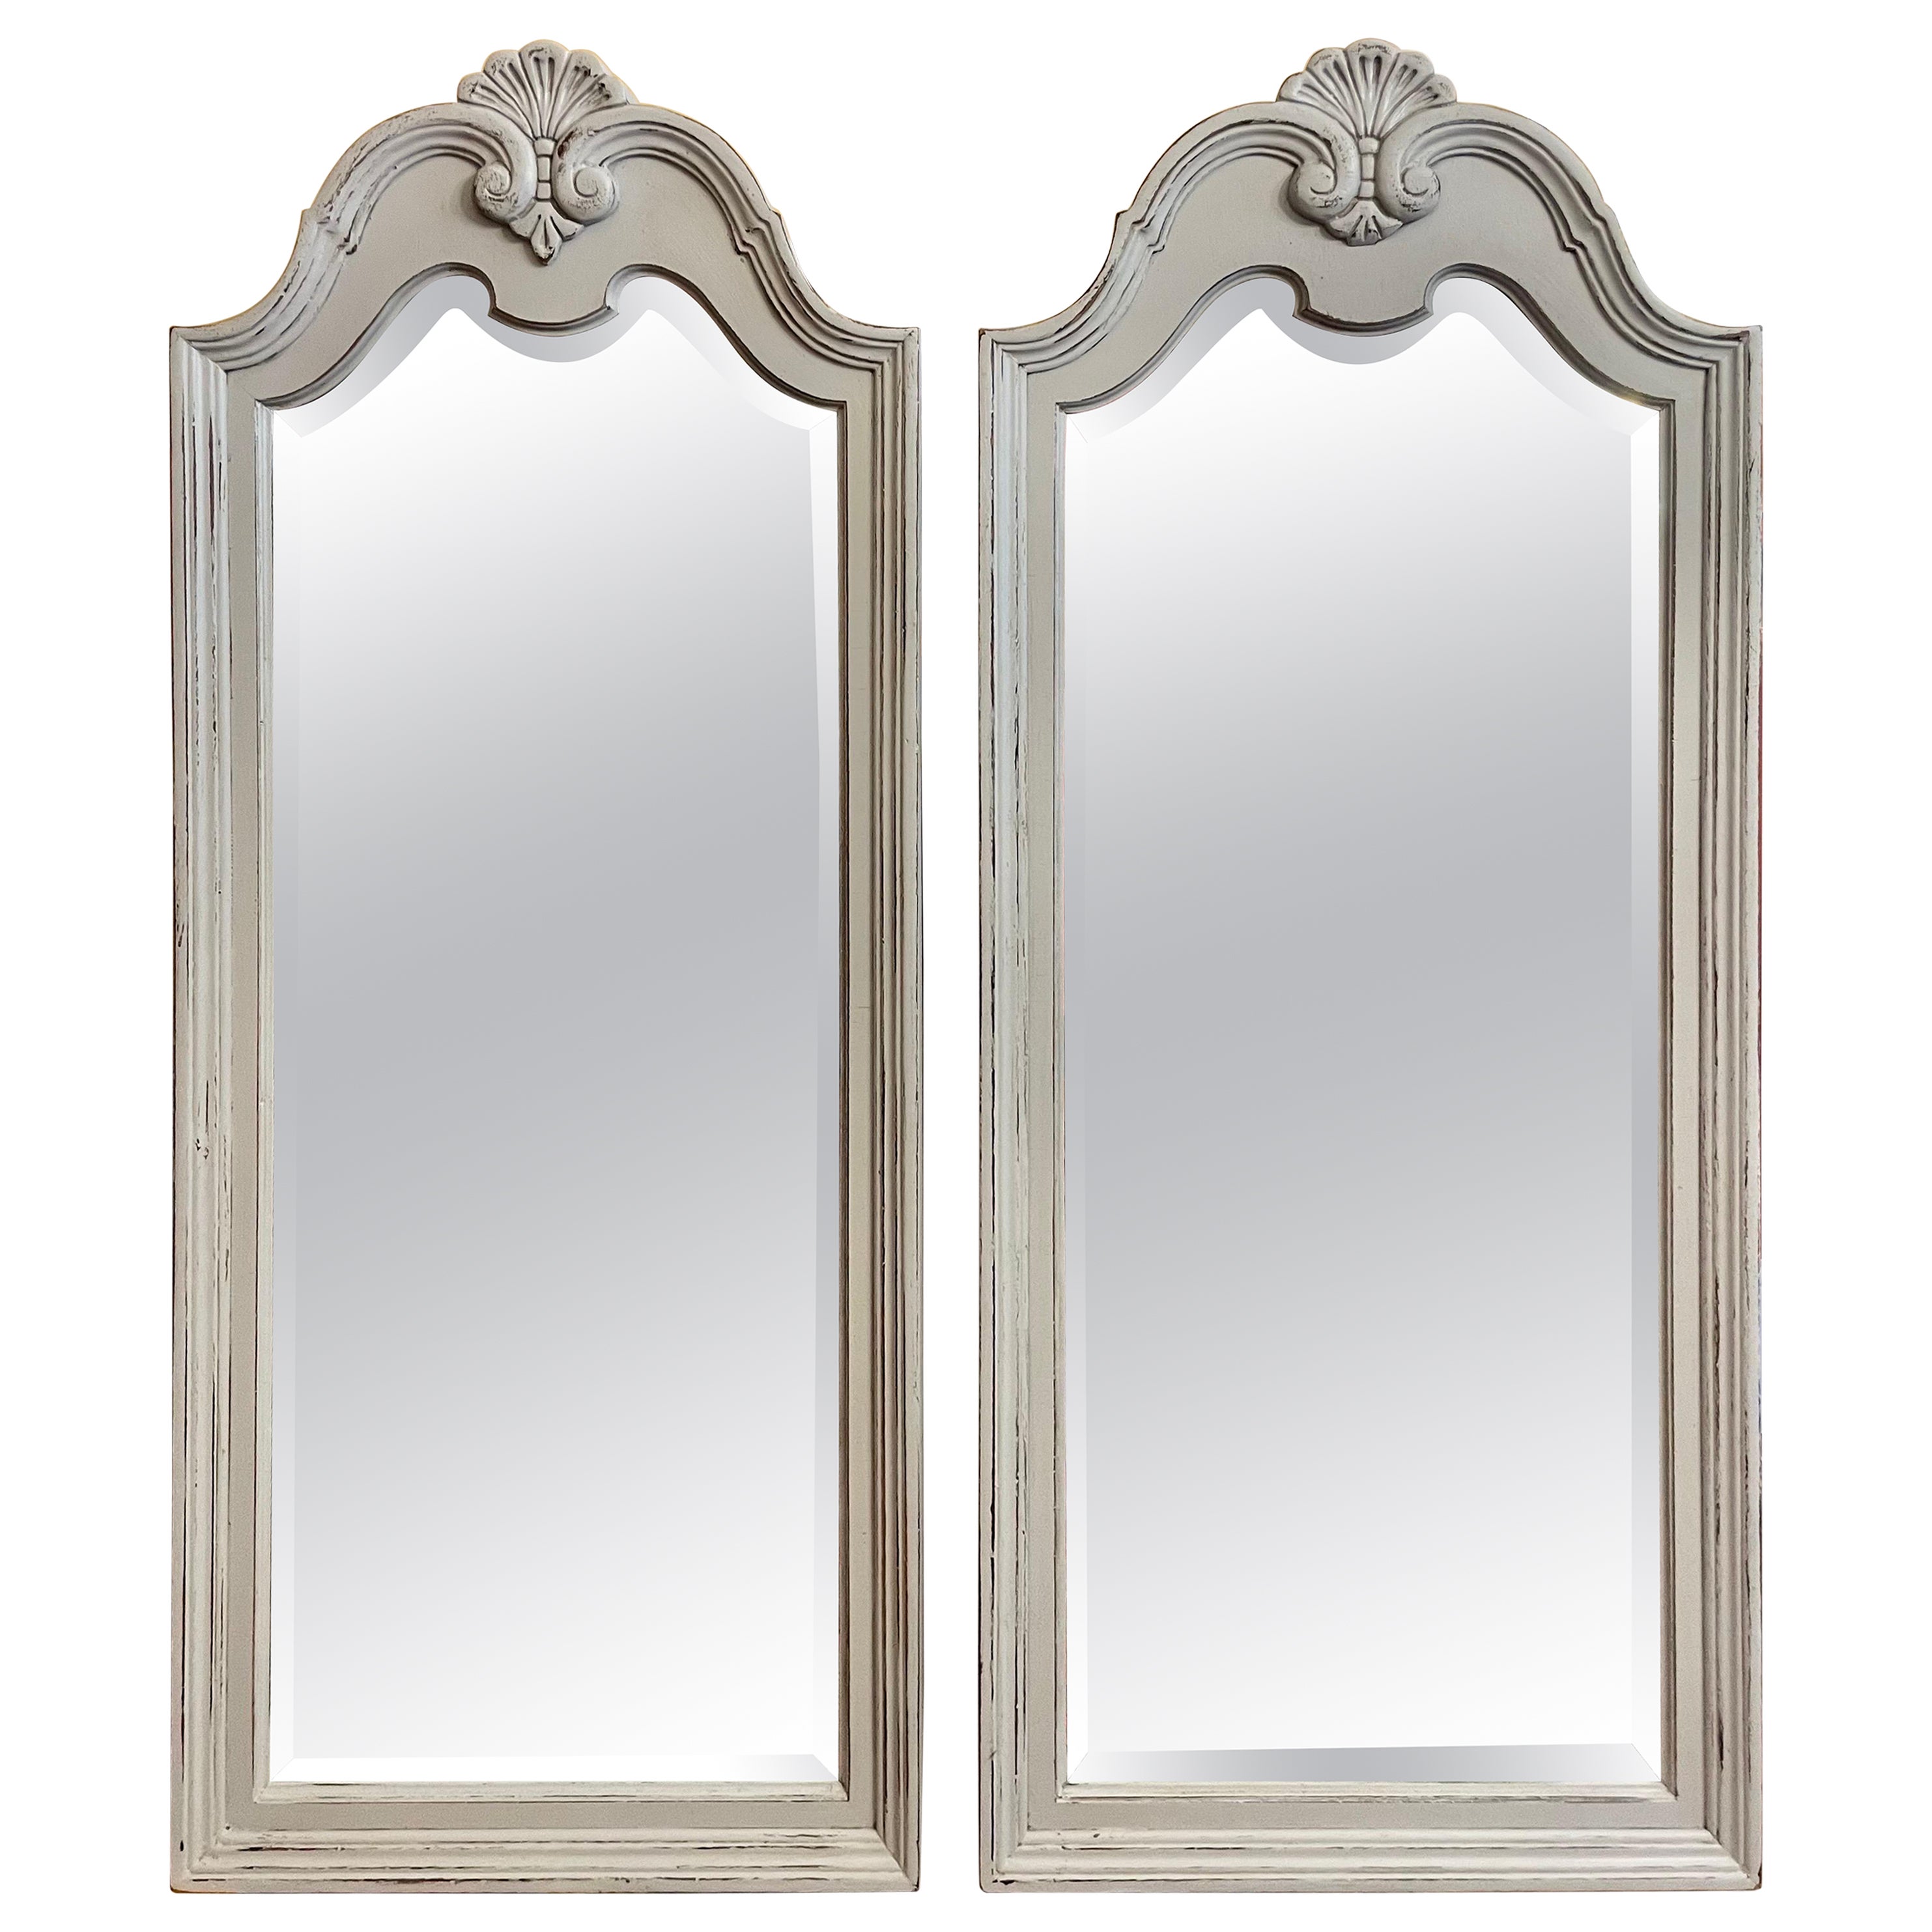 Pair of Large Carved Painted Beveled Mirrors For Sale